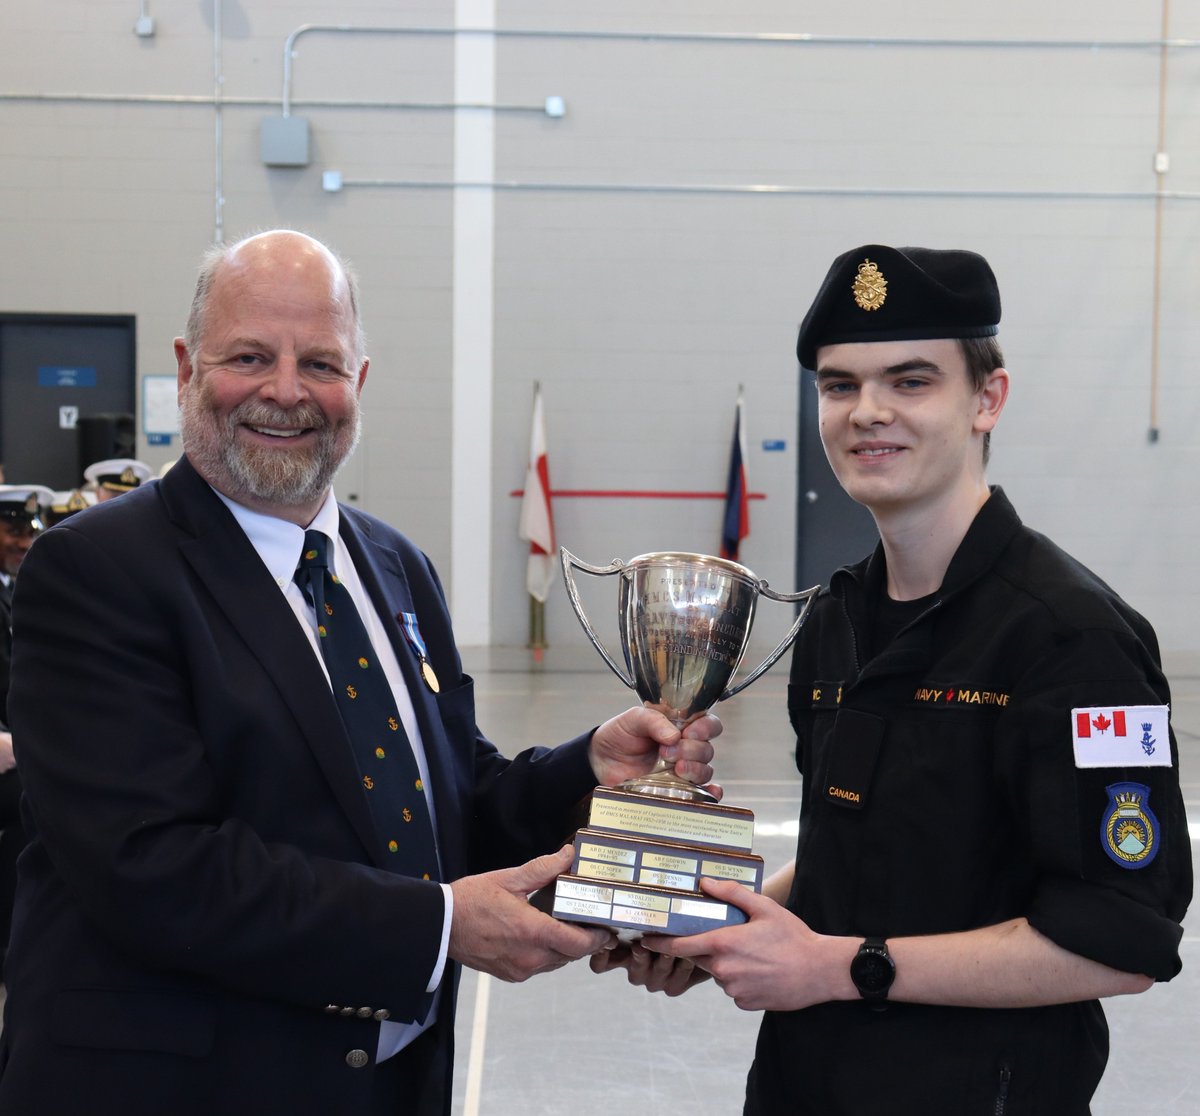 Congratulations to our 1st #HMCSMalahat Annual Awards’ recipient, S3 LeBlanc, who was awarded the Captain G.A.V. Thomson Trophy, presented to the most outstanding New Entry, based on performance, attendance, and character.

#WeTheNavy #ReadyAyeReady #victoriabc #yyj @RoyalCanNavy